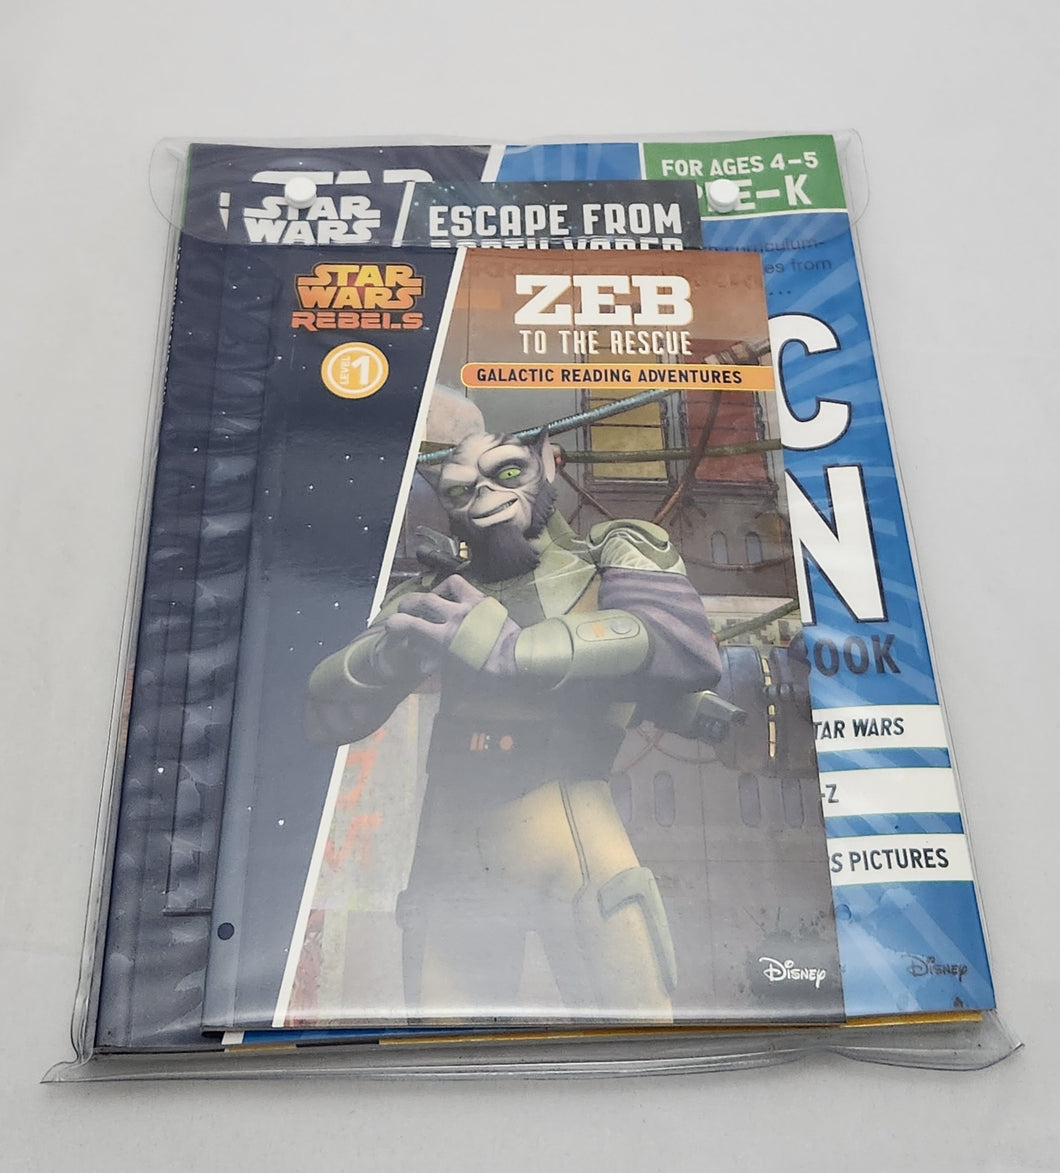 Star Wars Learning Pack